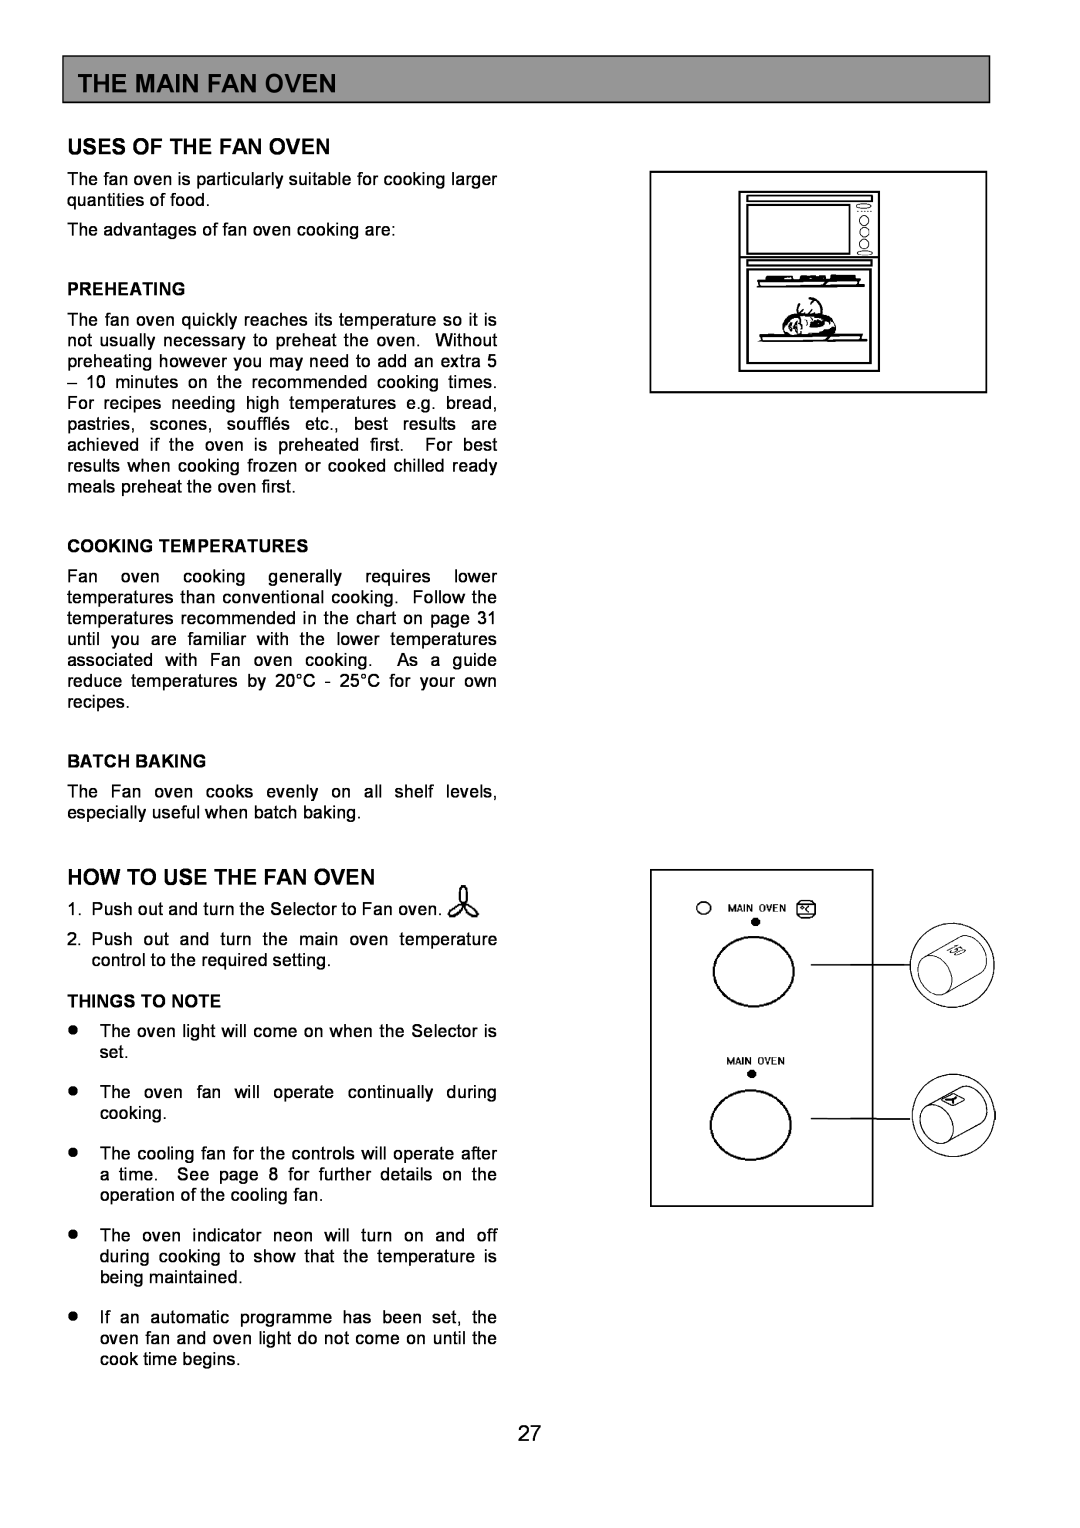 Zanussi 311608901 manual The Main Fan Oven, Uses Of The Fan Oven, How To Use The Fan Oven, Preheating, Cooking Temperatures 